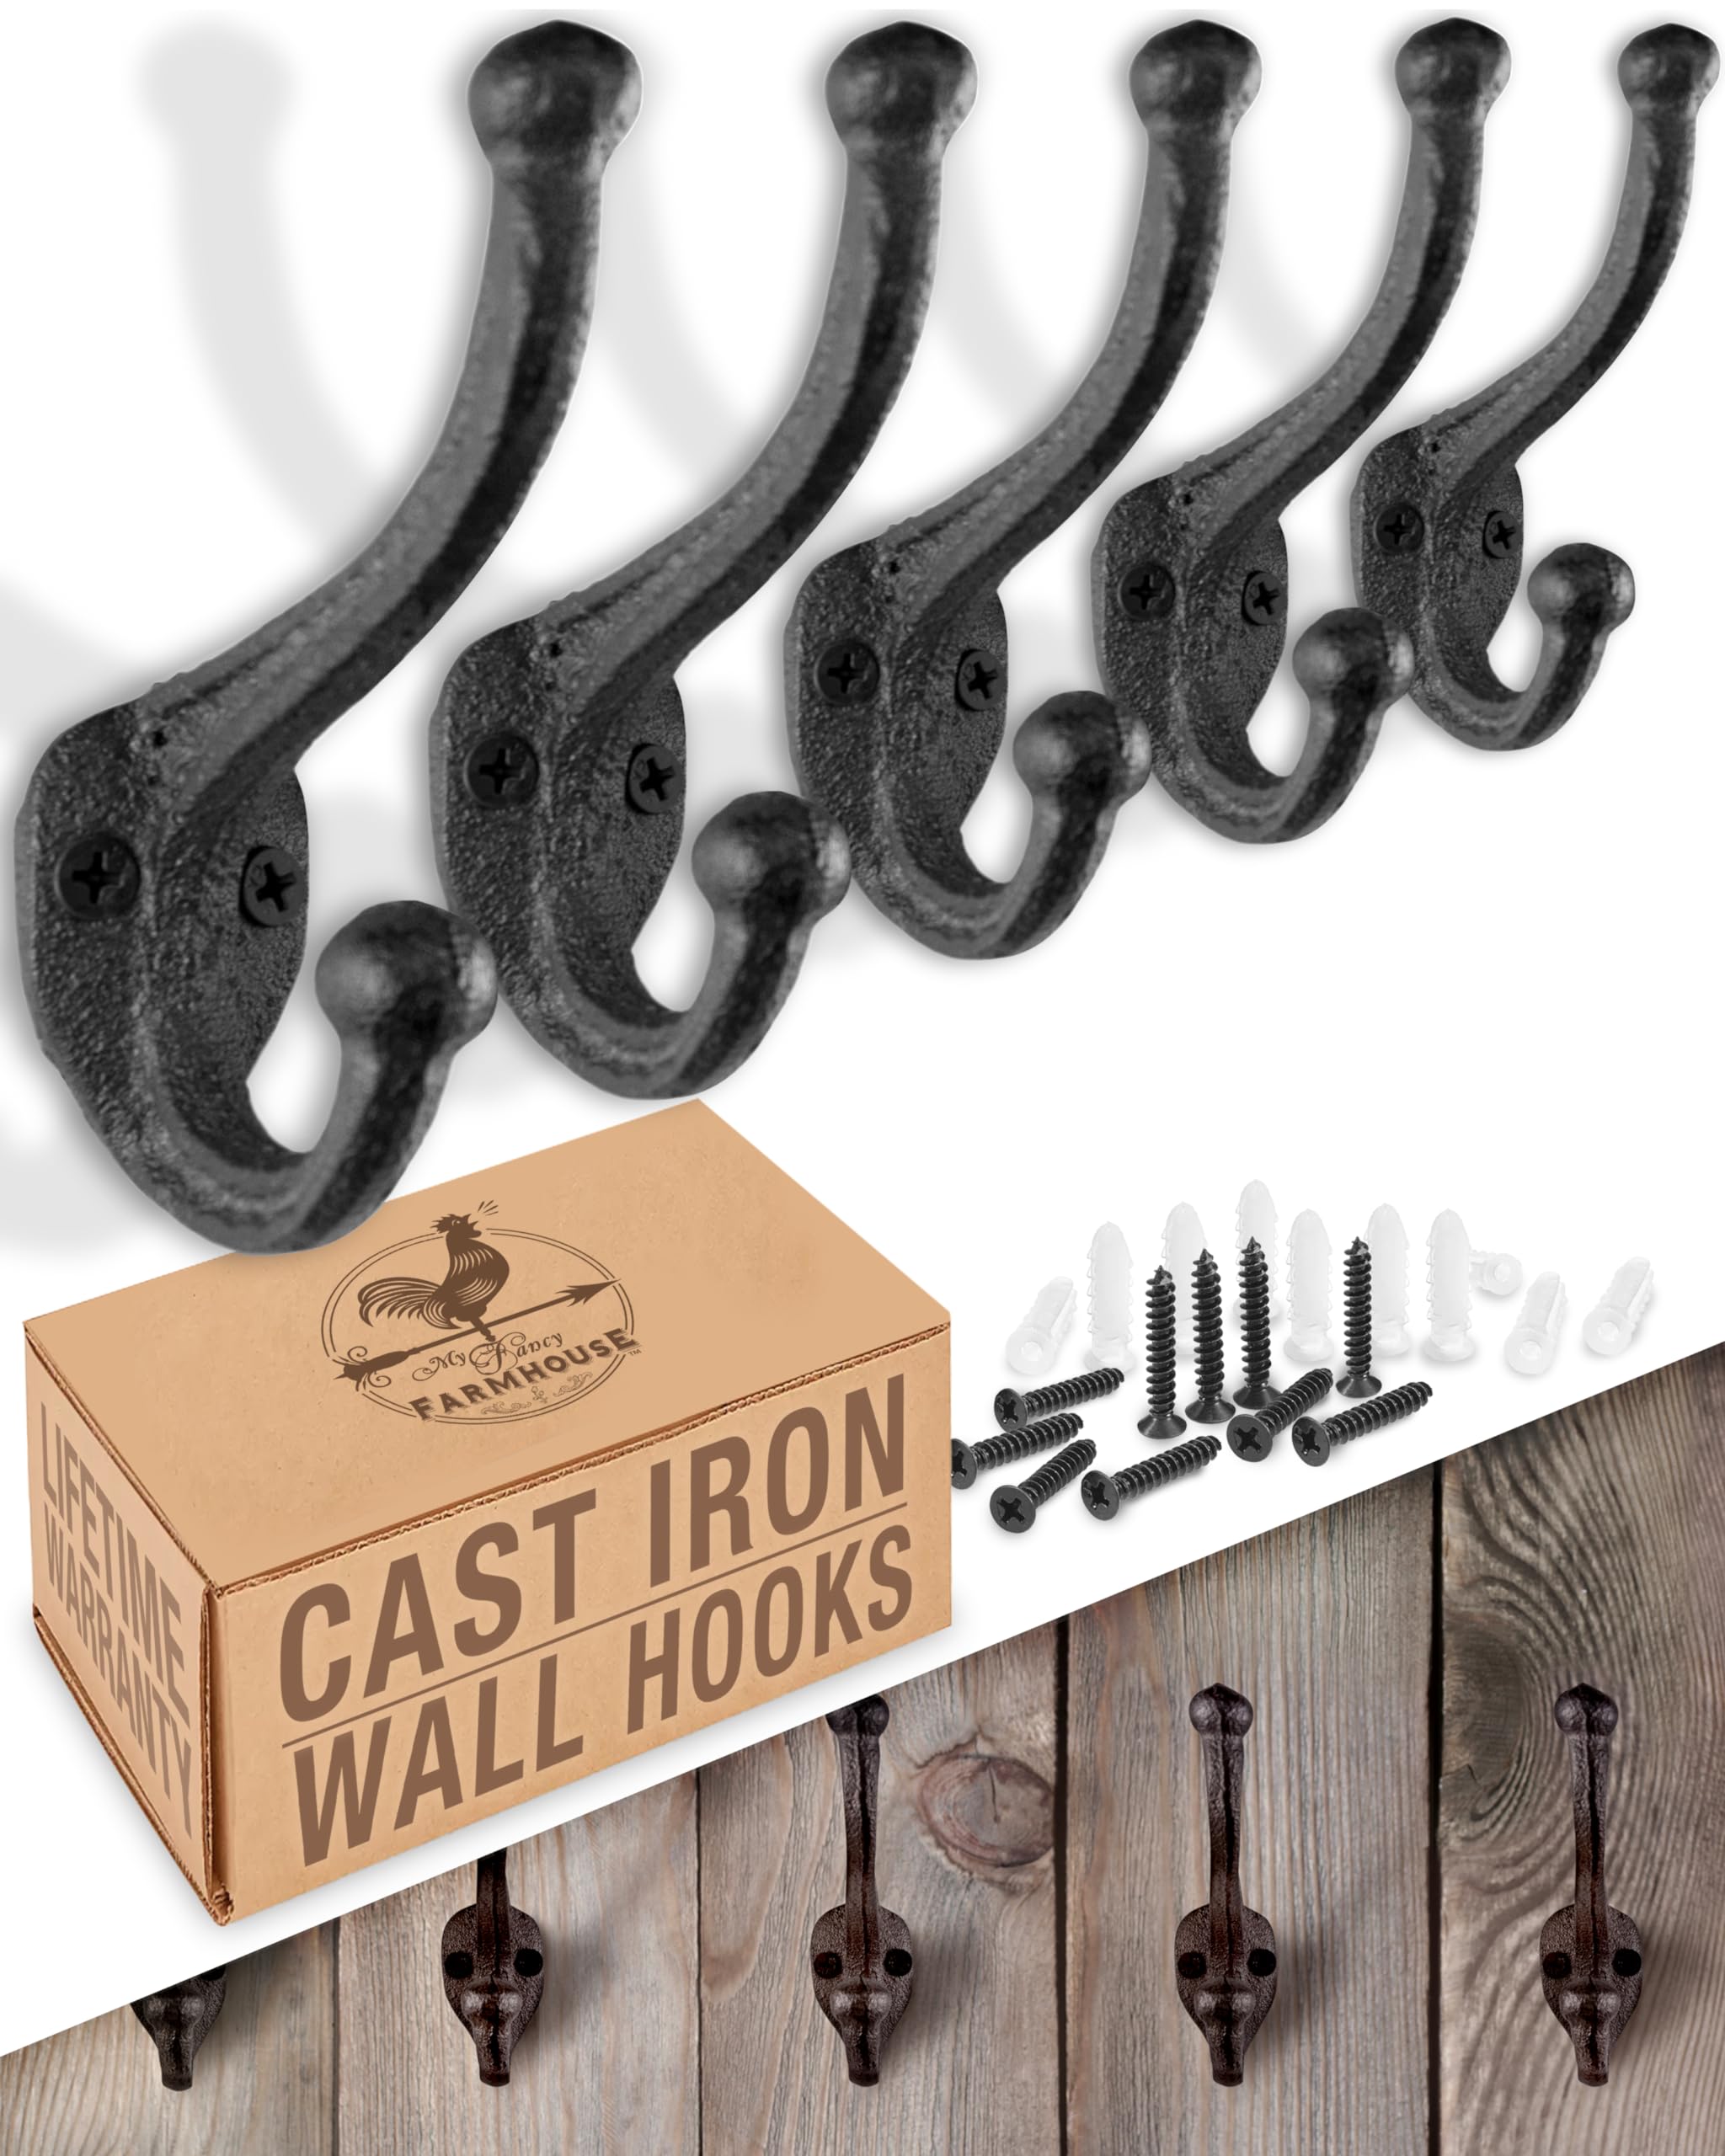 Rustic Cast Iron Coat Hooks Wall Mounted Farmhouse Decorative Wall Hooks, Vintage Hooks for Hanging Coats, Bags, Hats, Towels